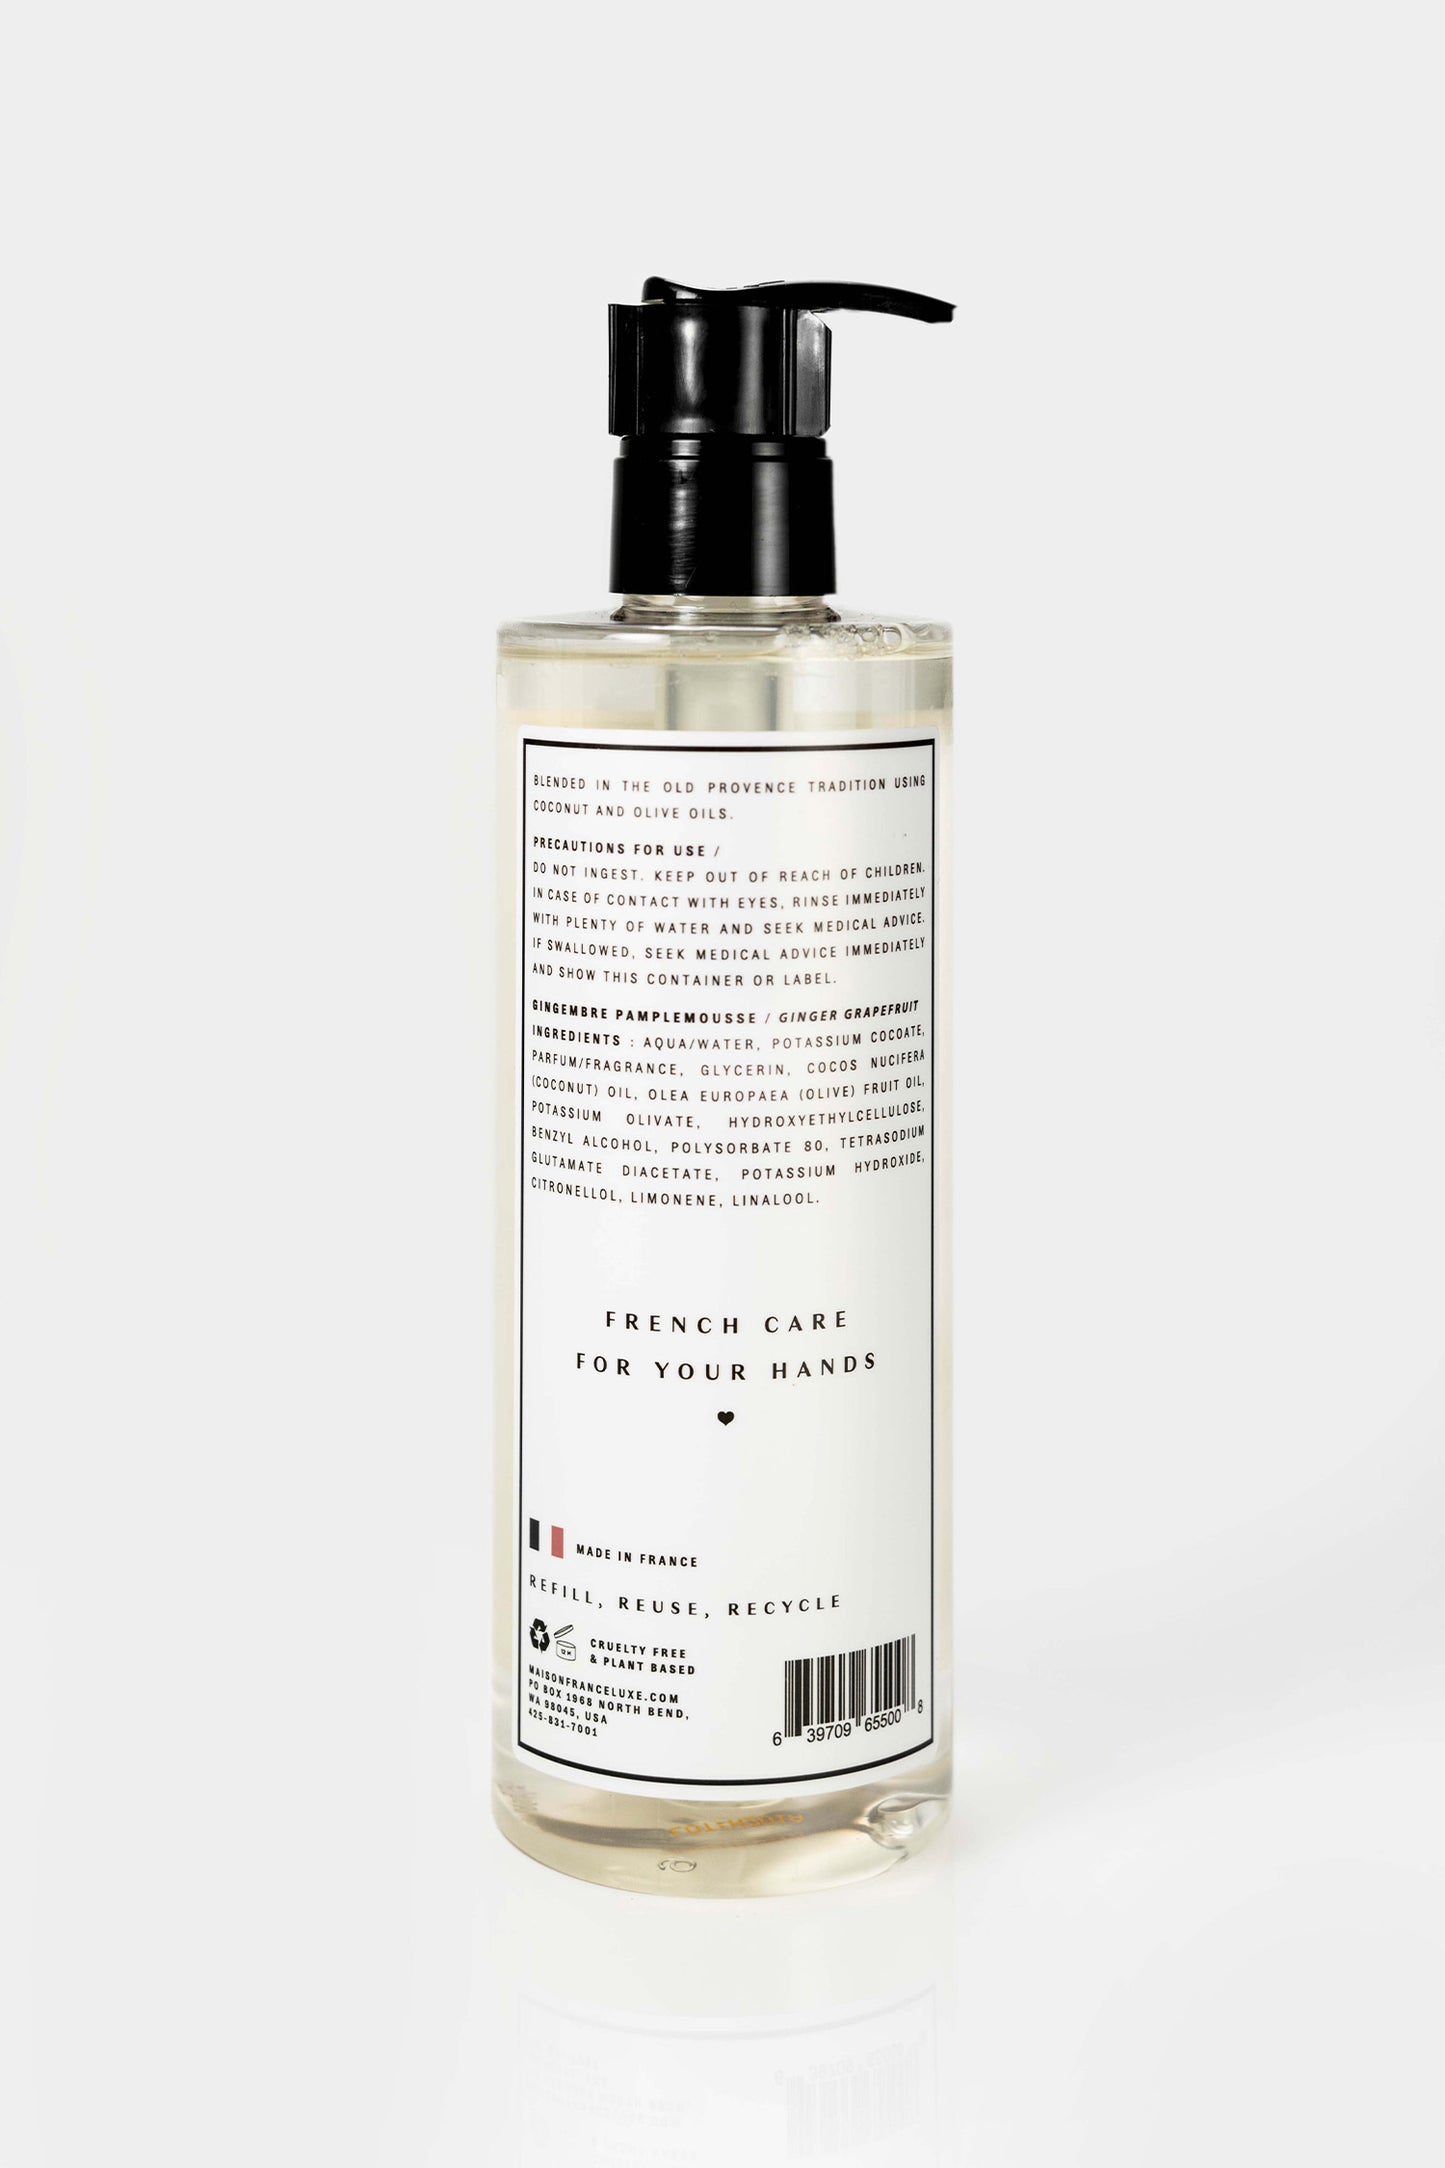 Natural French hand soap made with plant-based ingredients.